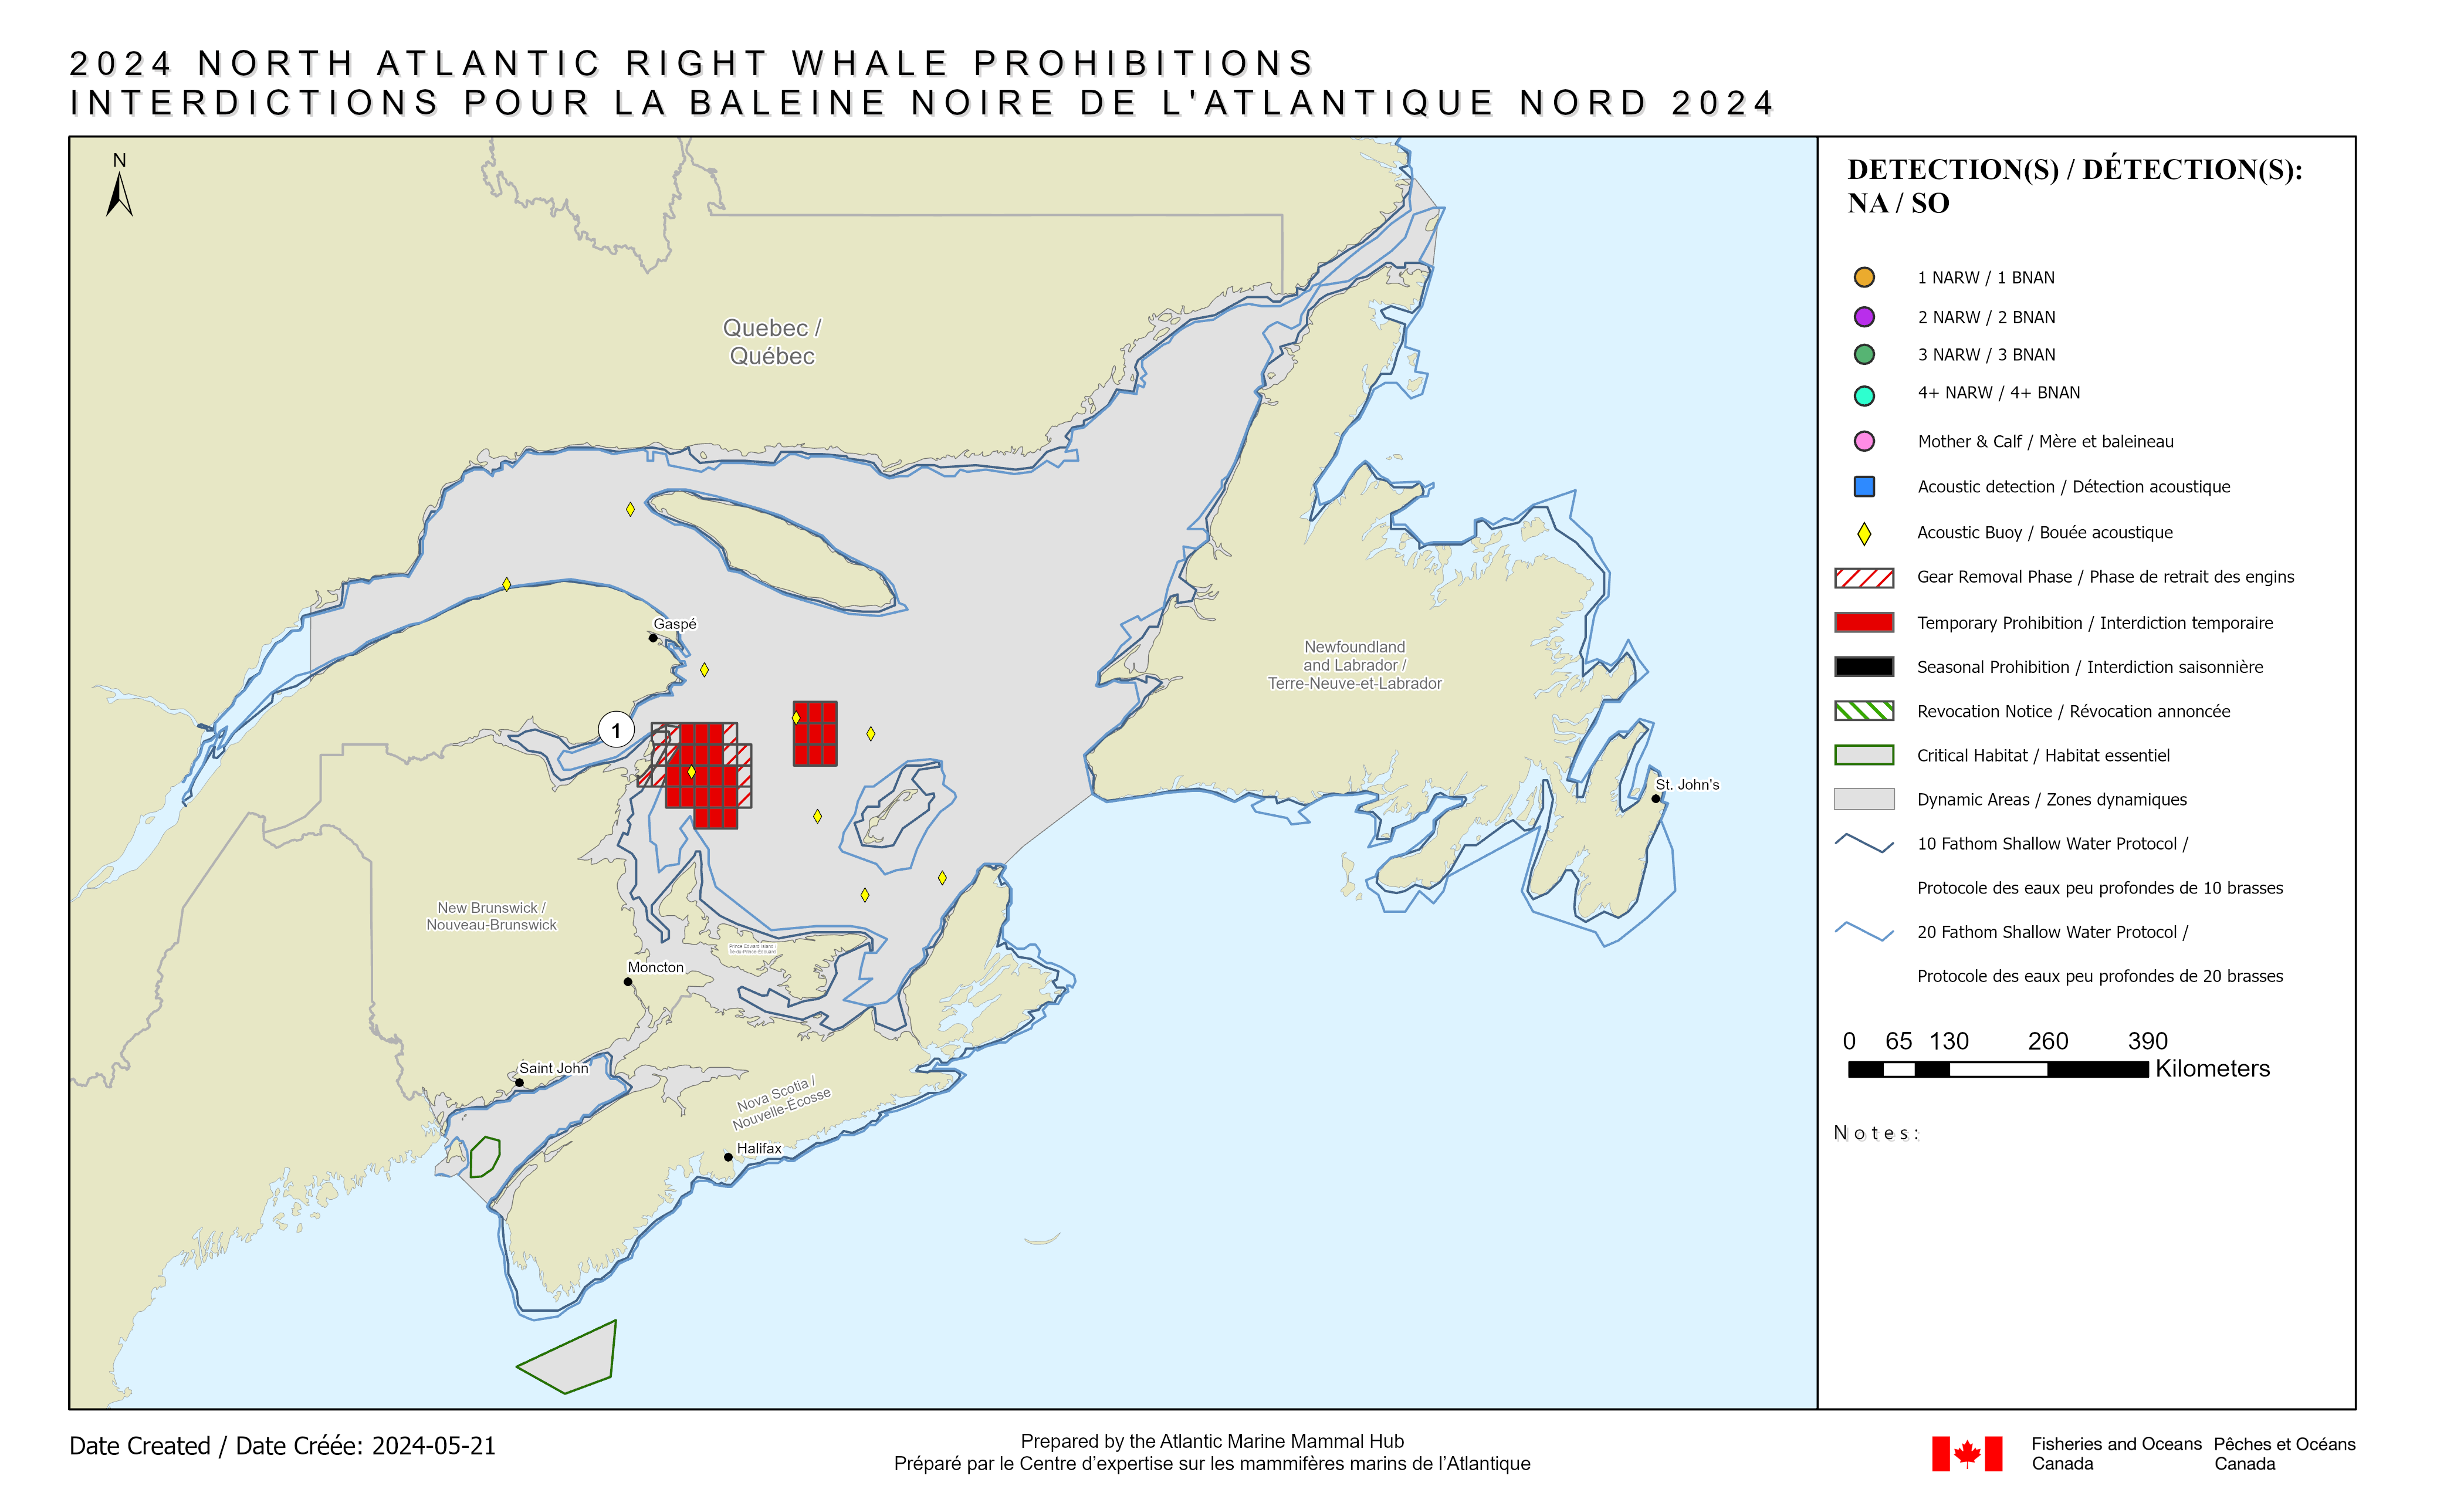 Additional Gulf of St. Lawrence Grid Closures Named As Snow Crab Harvesters Land 95% of Quota